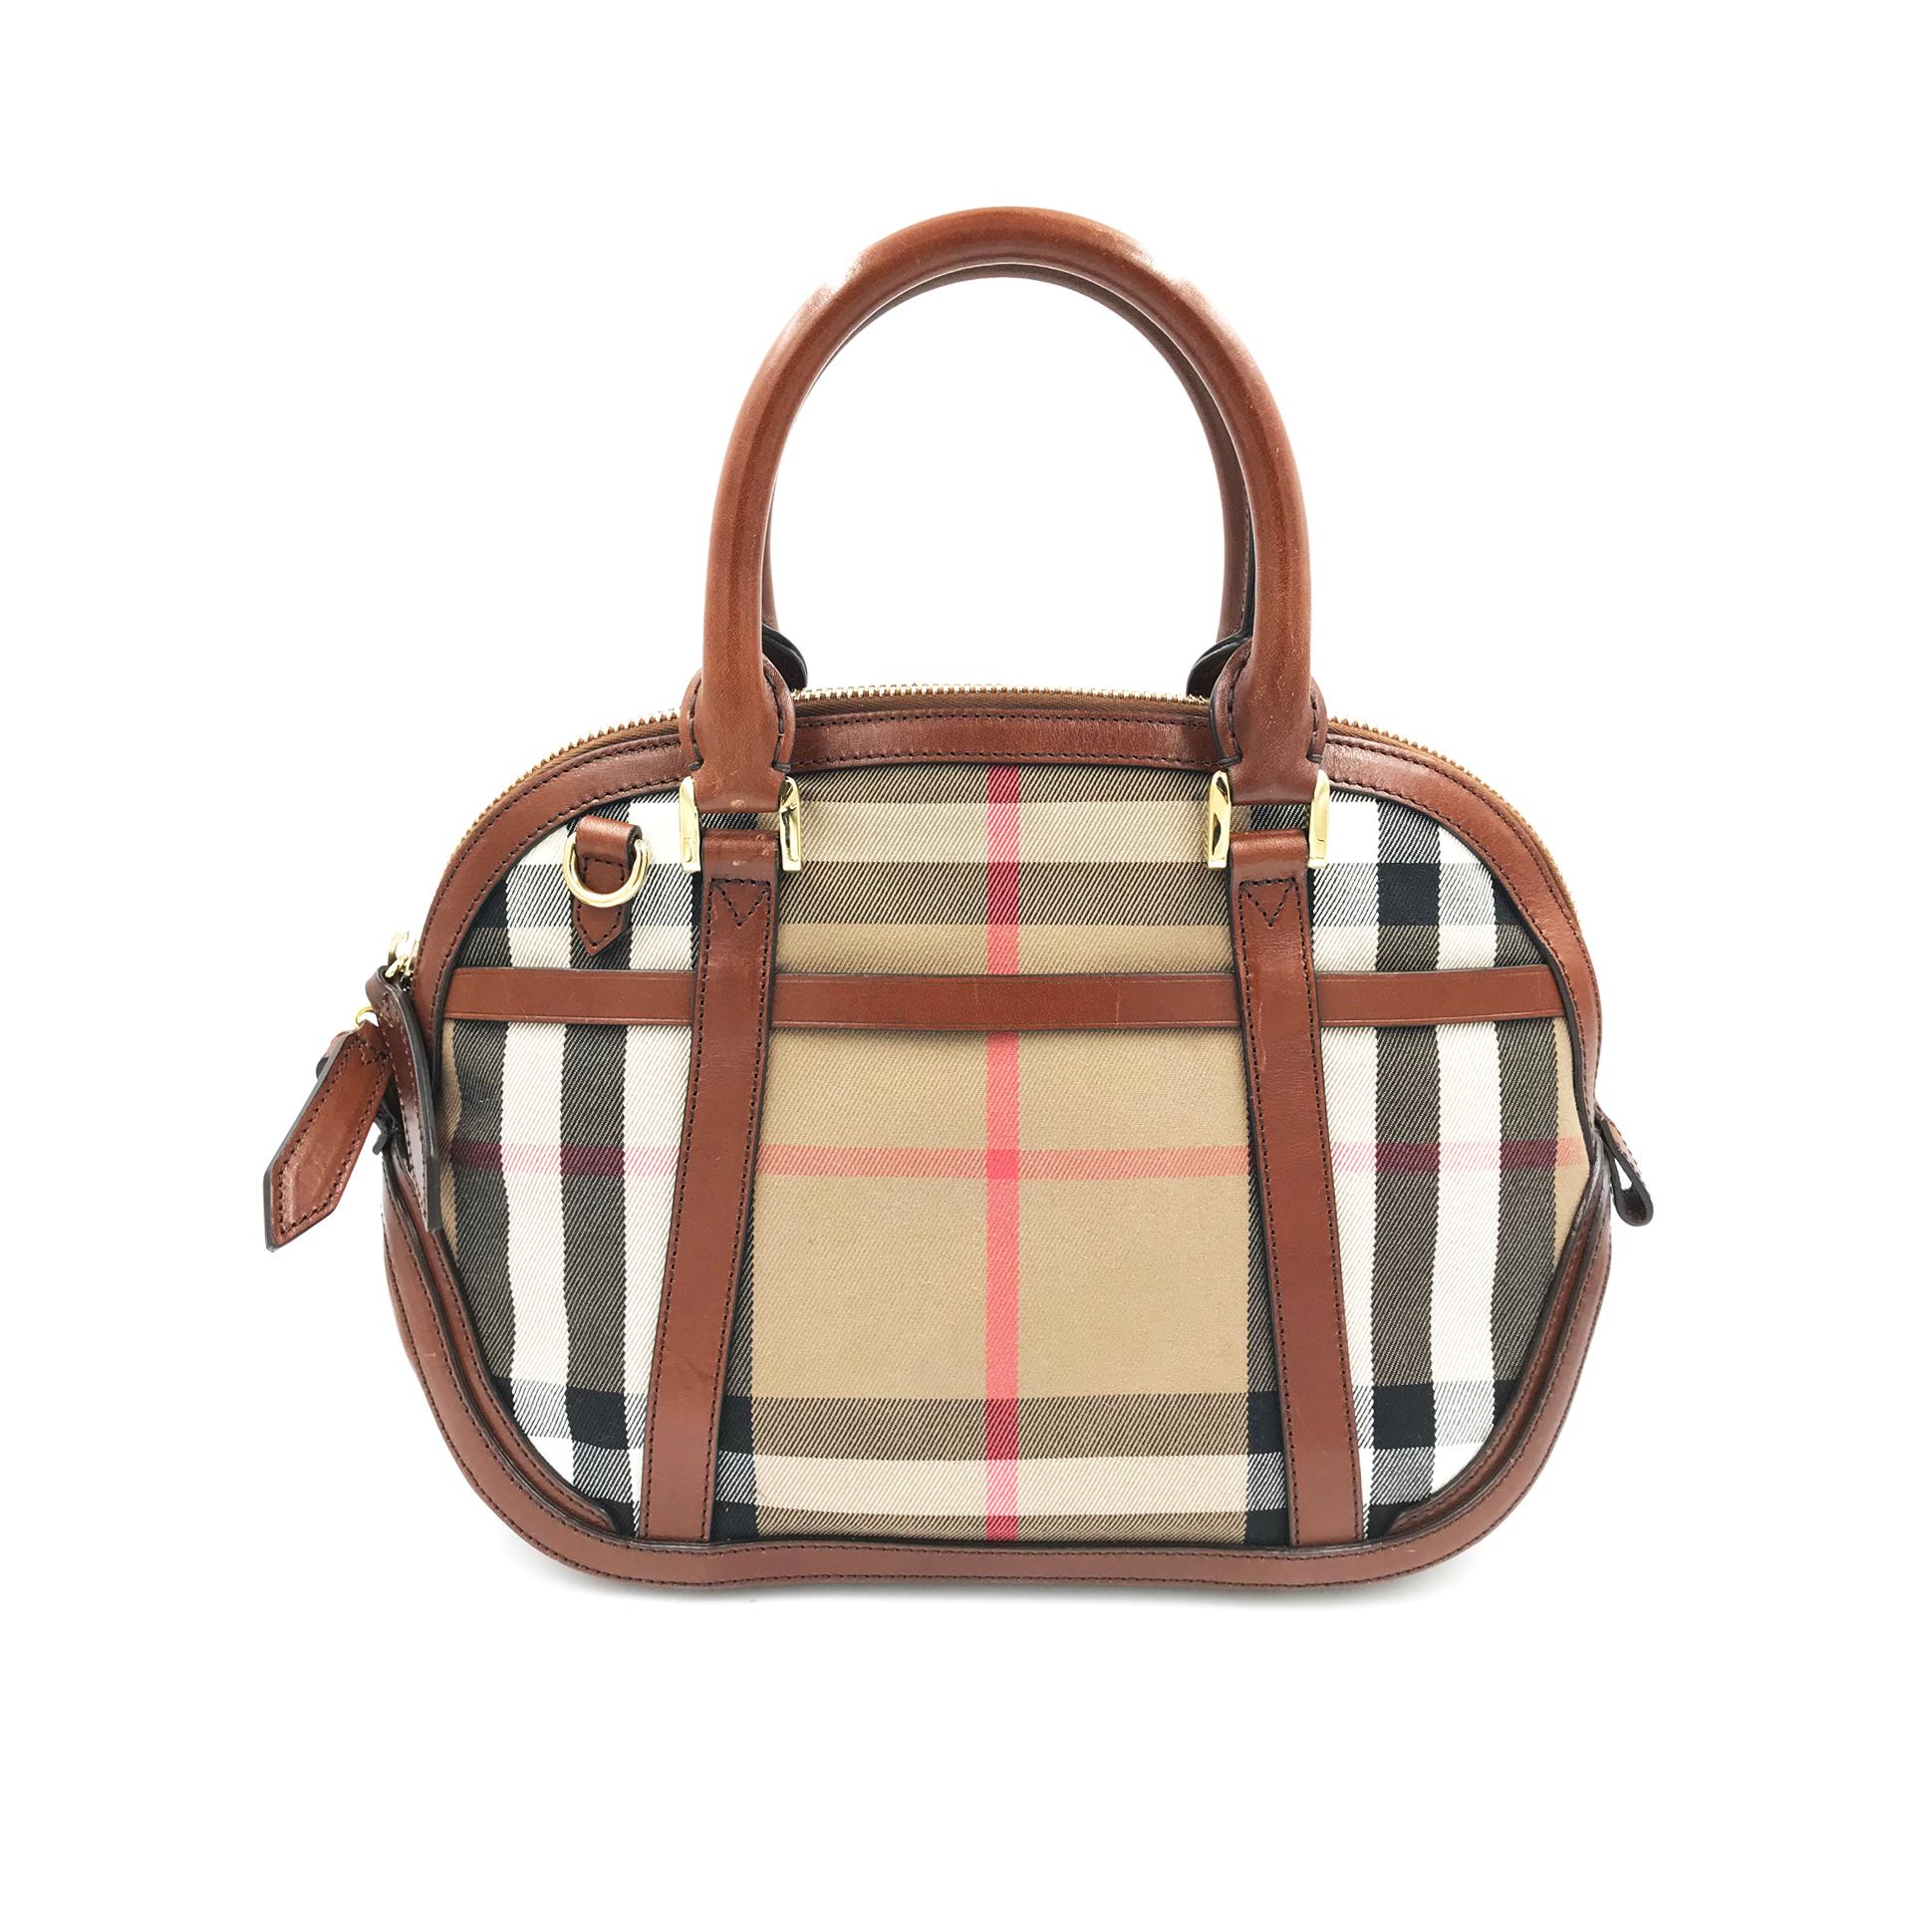 Brown leather and cotton cotton 'Orchard' tote from Burberry featuring a nude and black Haymarket check body. a gold-tone zip up fastening, two short rounded handles to the top, a detachable shoulder strap, a padlock charm detail to the front and a